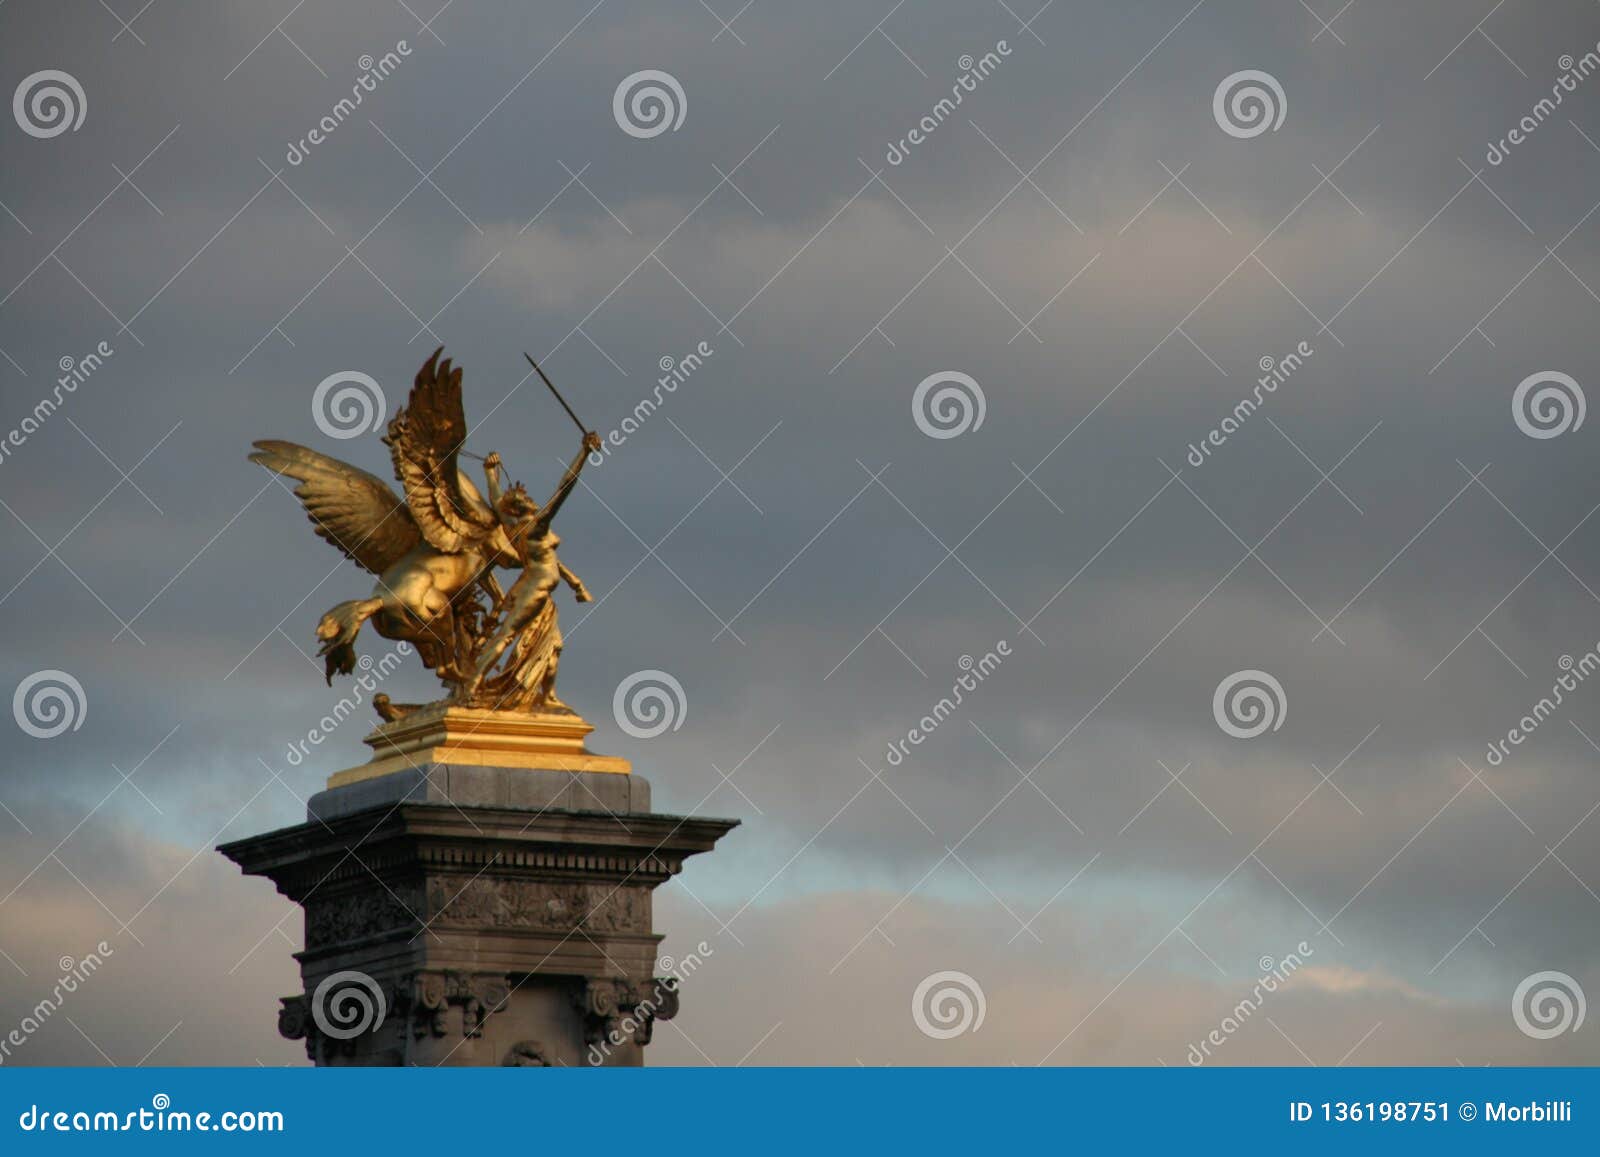 Grand Palais And Golden Statues Of Pont Alexandre III 